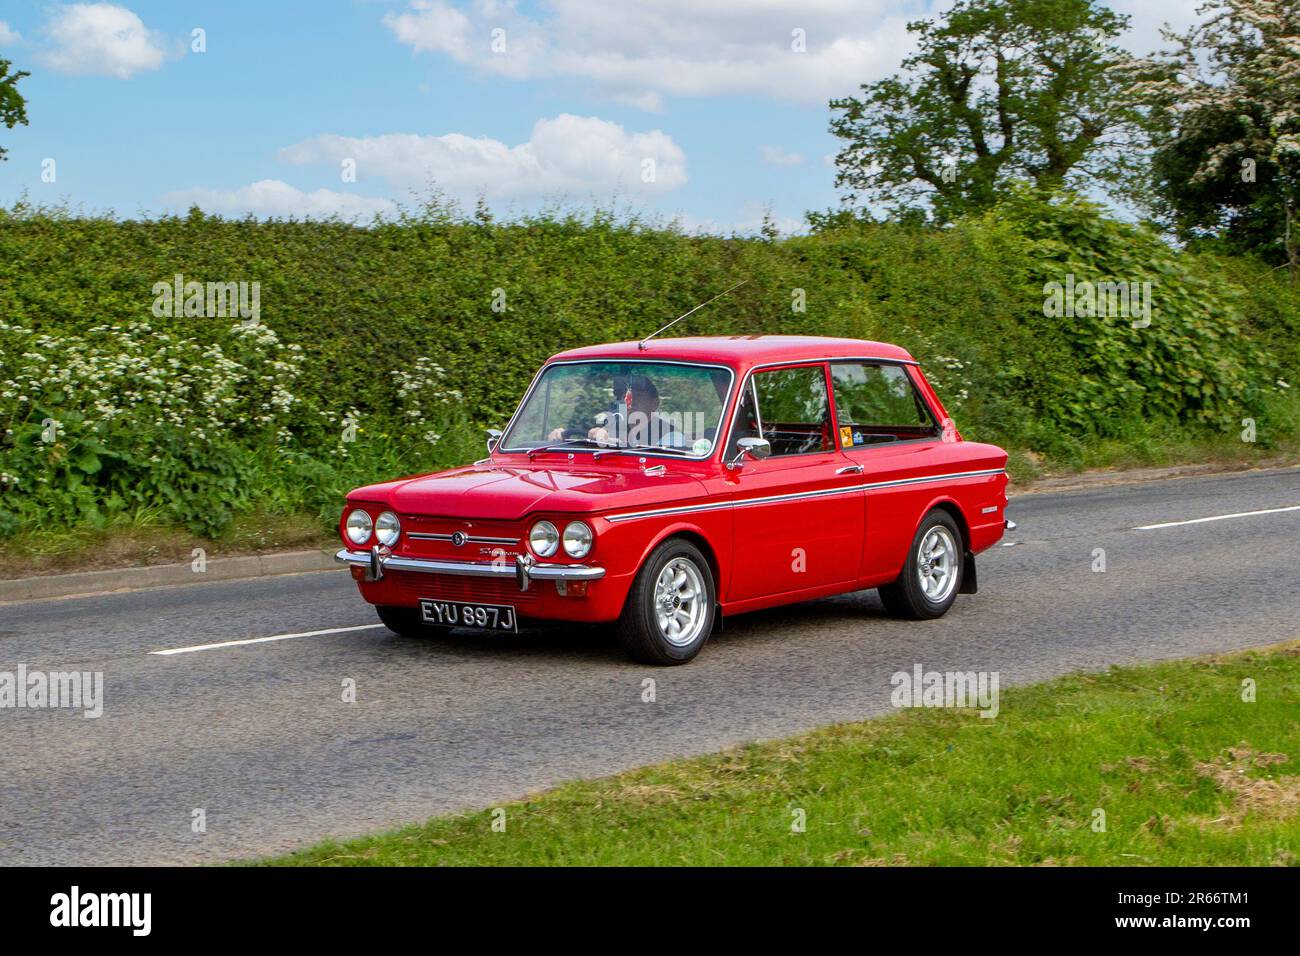 1971 70s seventies Red SUNBEAM IMP 876 cc Classic vintage car, Yesteryear motors en route to Capesthorne Hall Vintage Collectors car show Cheshire, UK Stock Photo